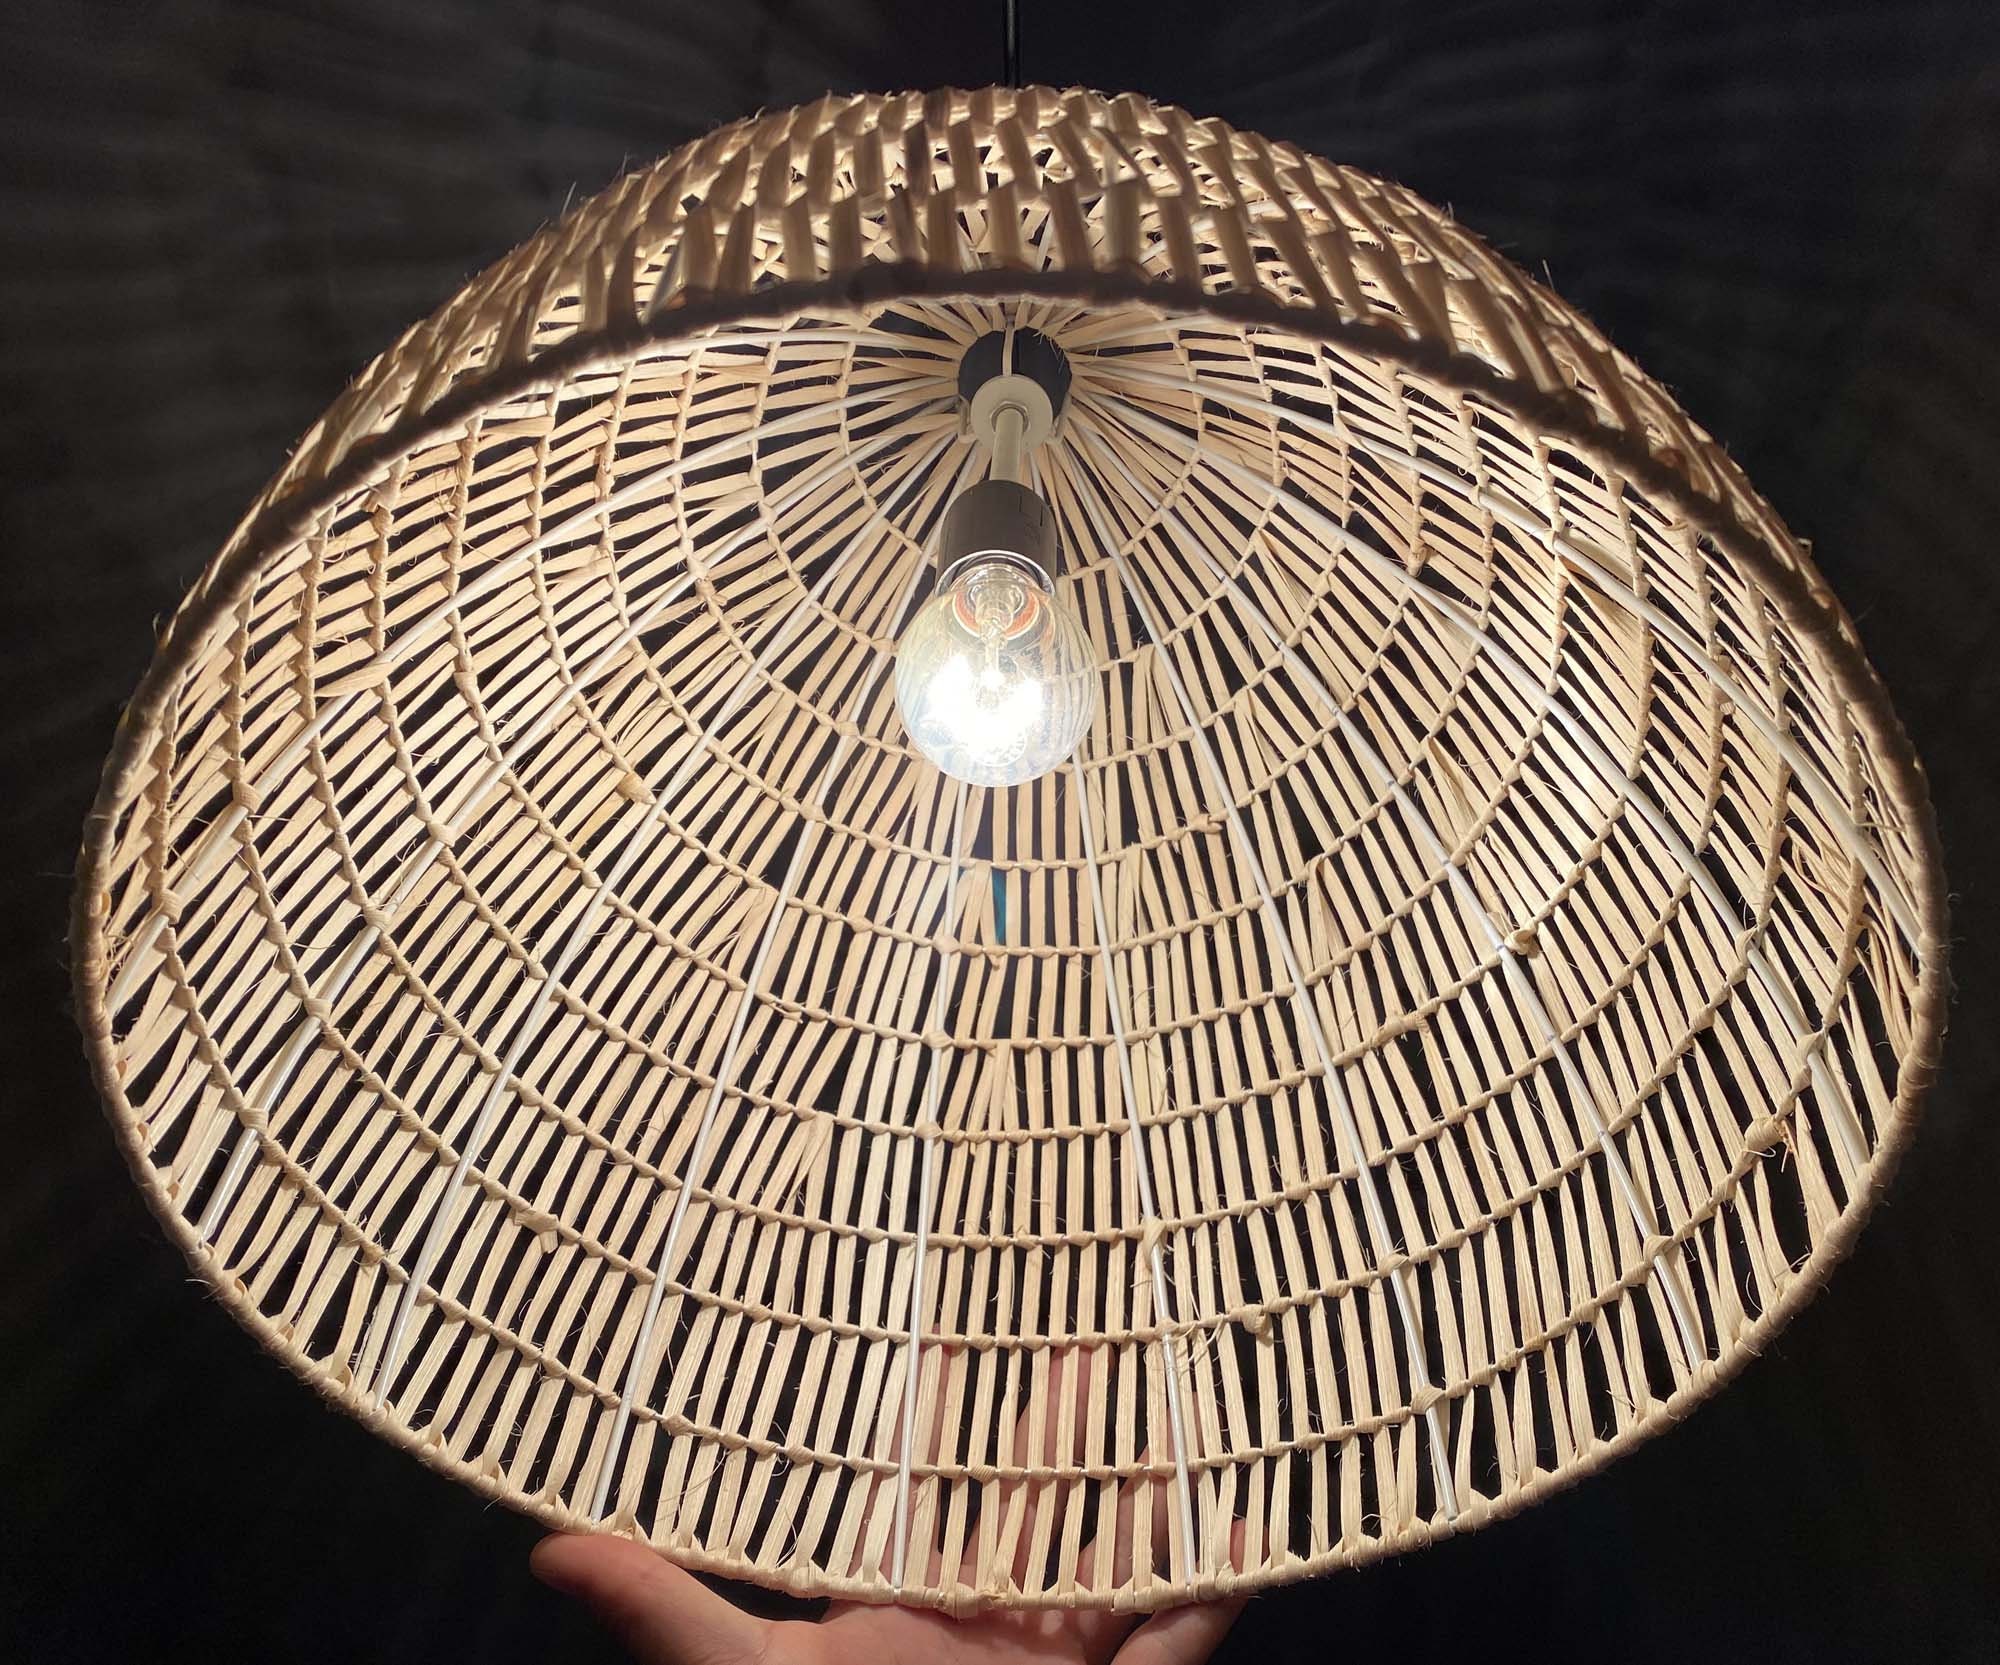 GANAZONO 2pcs Woven Lamp Shade Rattan Pendant Light Cover Vintage Chandelier Lampshades Farmhouse Hallway Lights Dome for Home Restaurant Office 